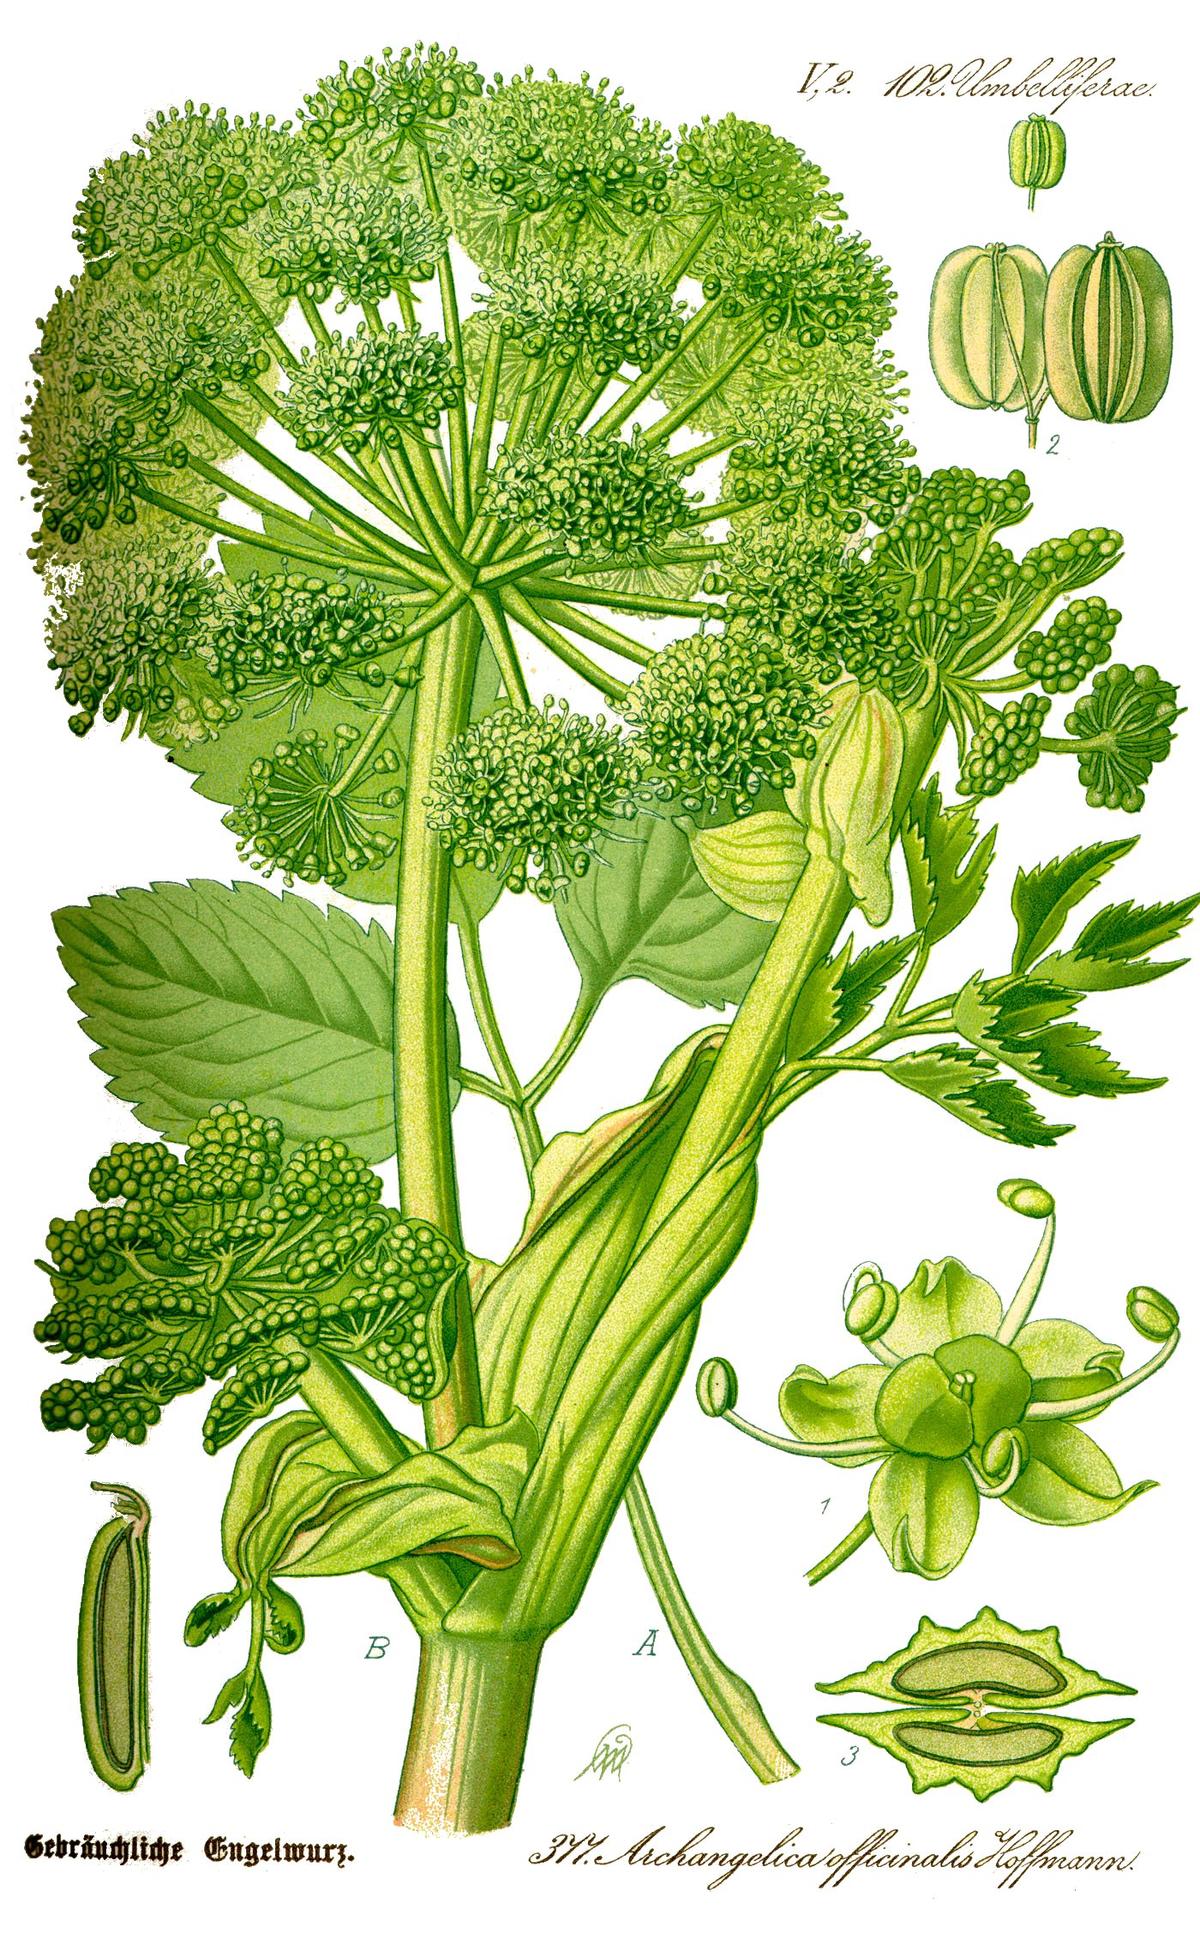 An 1885 illustration of Angelica archengelica, a European plant closely related to dong quai (Angelica sinensis). (Public domain)